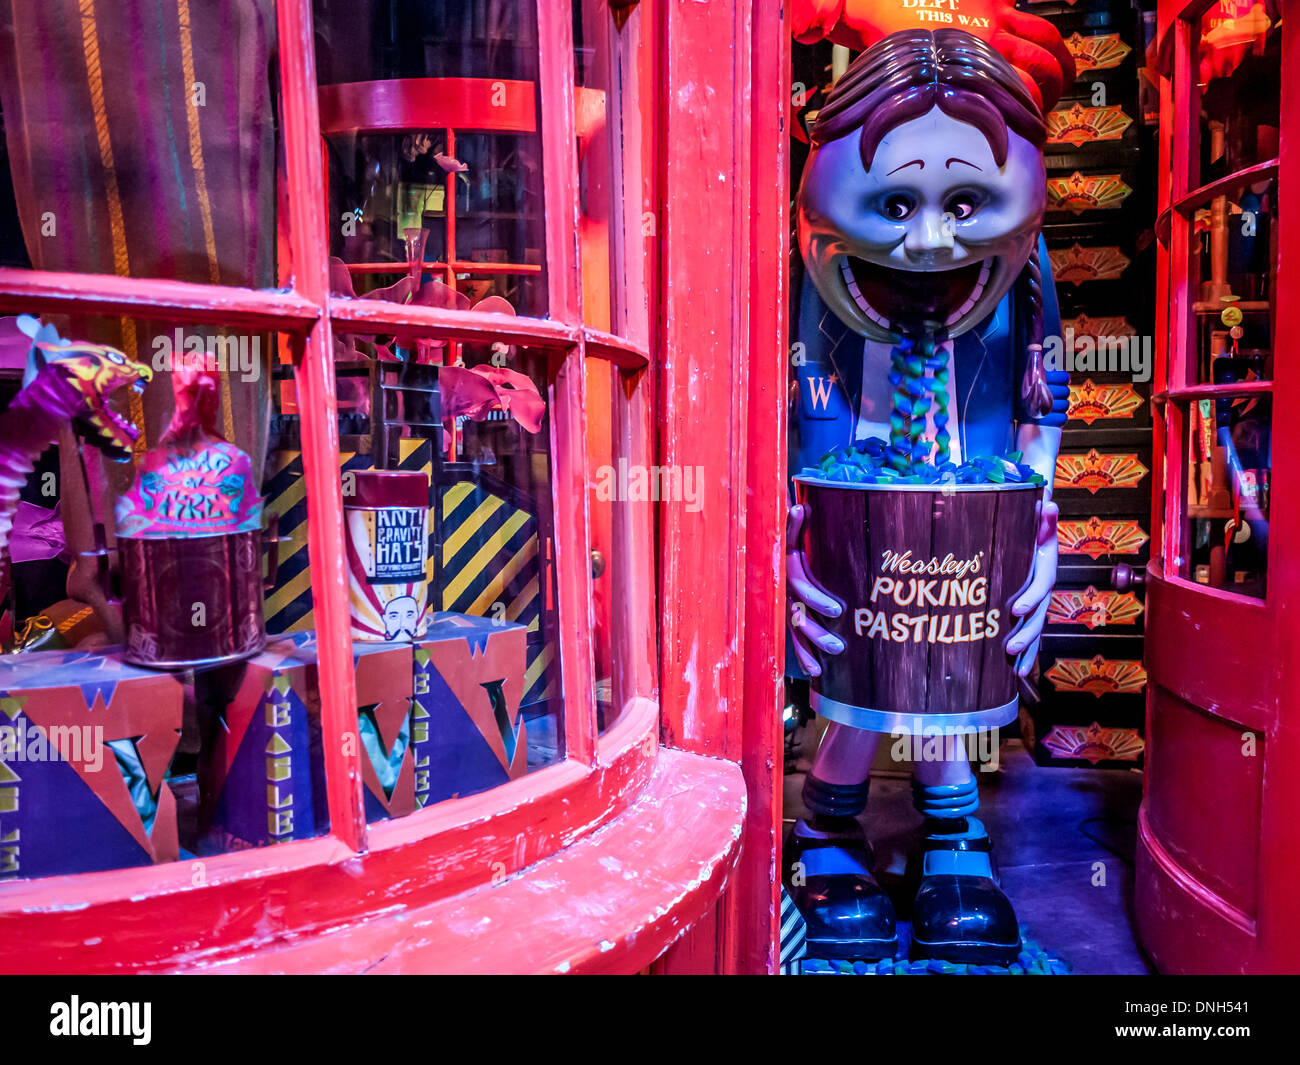 Fred and George Weasley's Weasleys' Wizard Wheezes shop At Warner Bros.  Studio Tour London – The Making of Harry Potter, London Stock Photo - Alamy